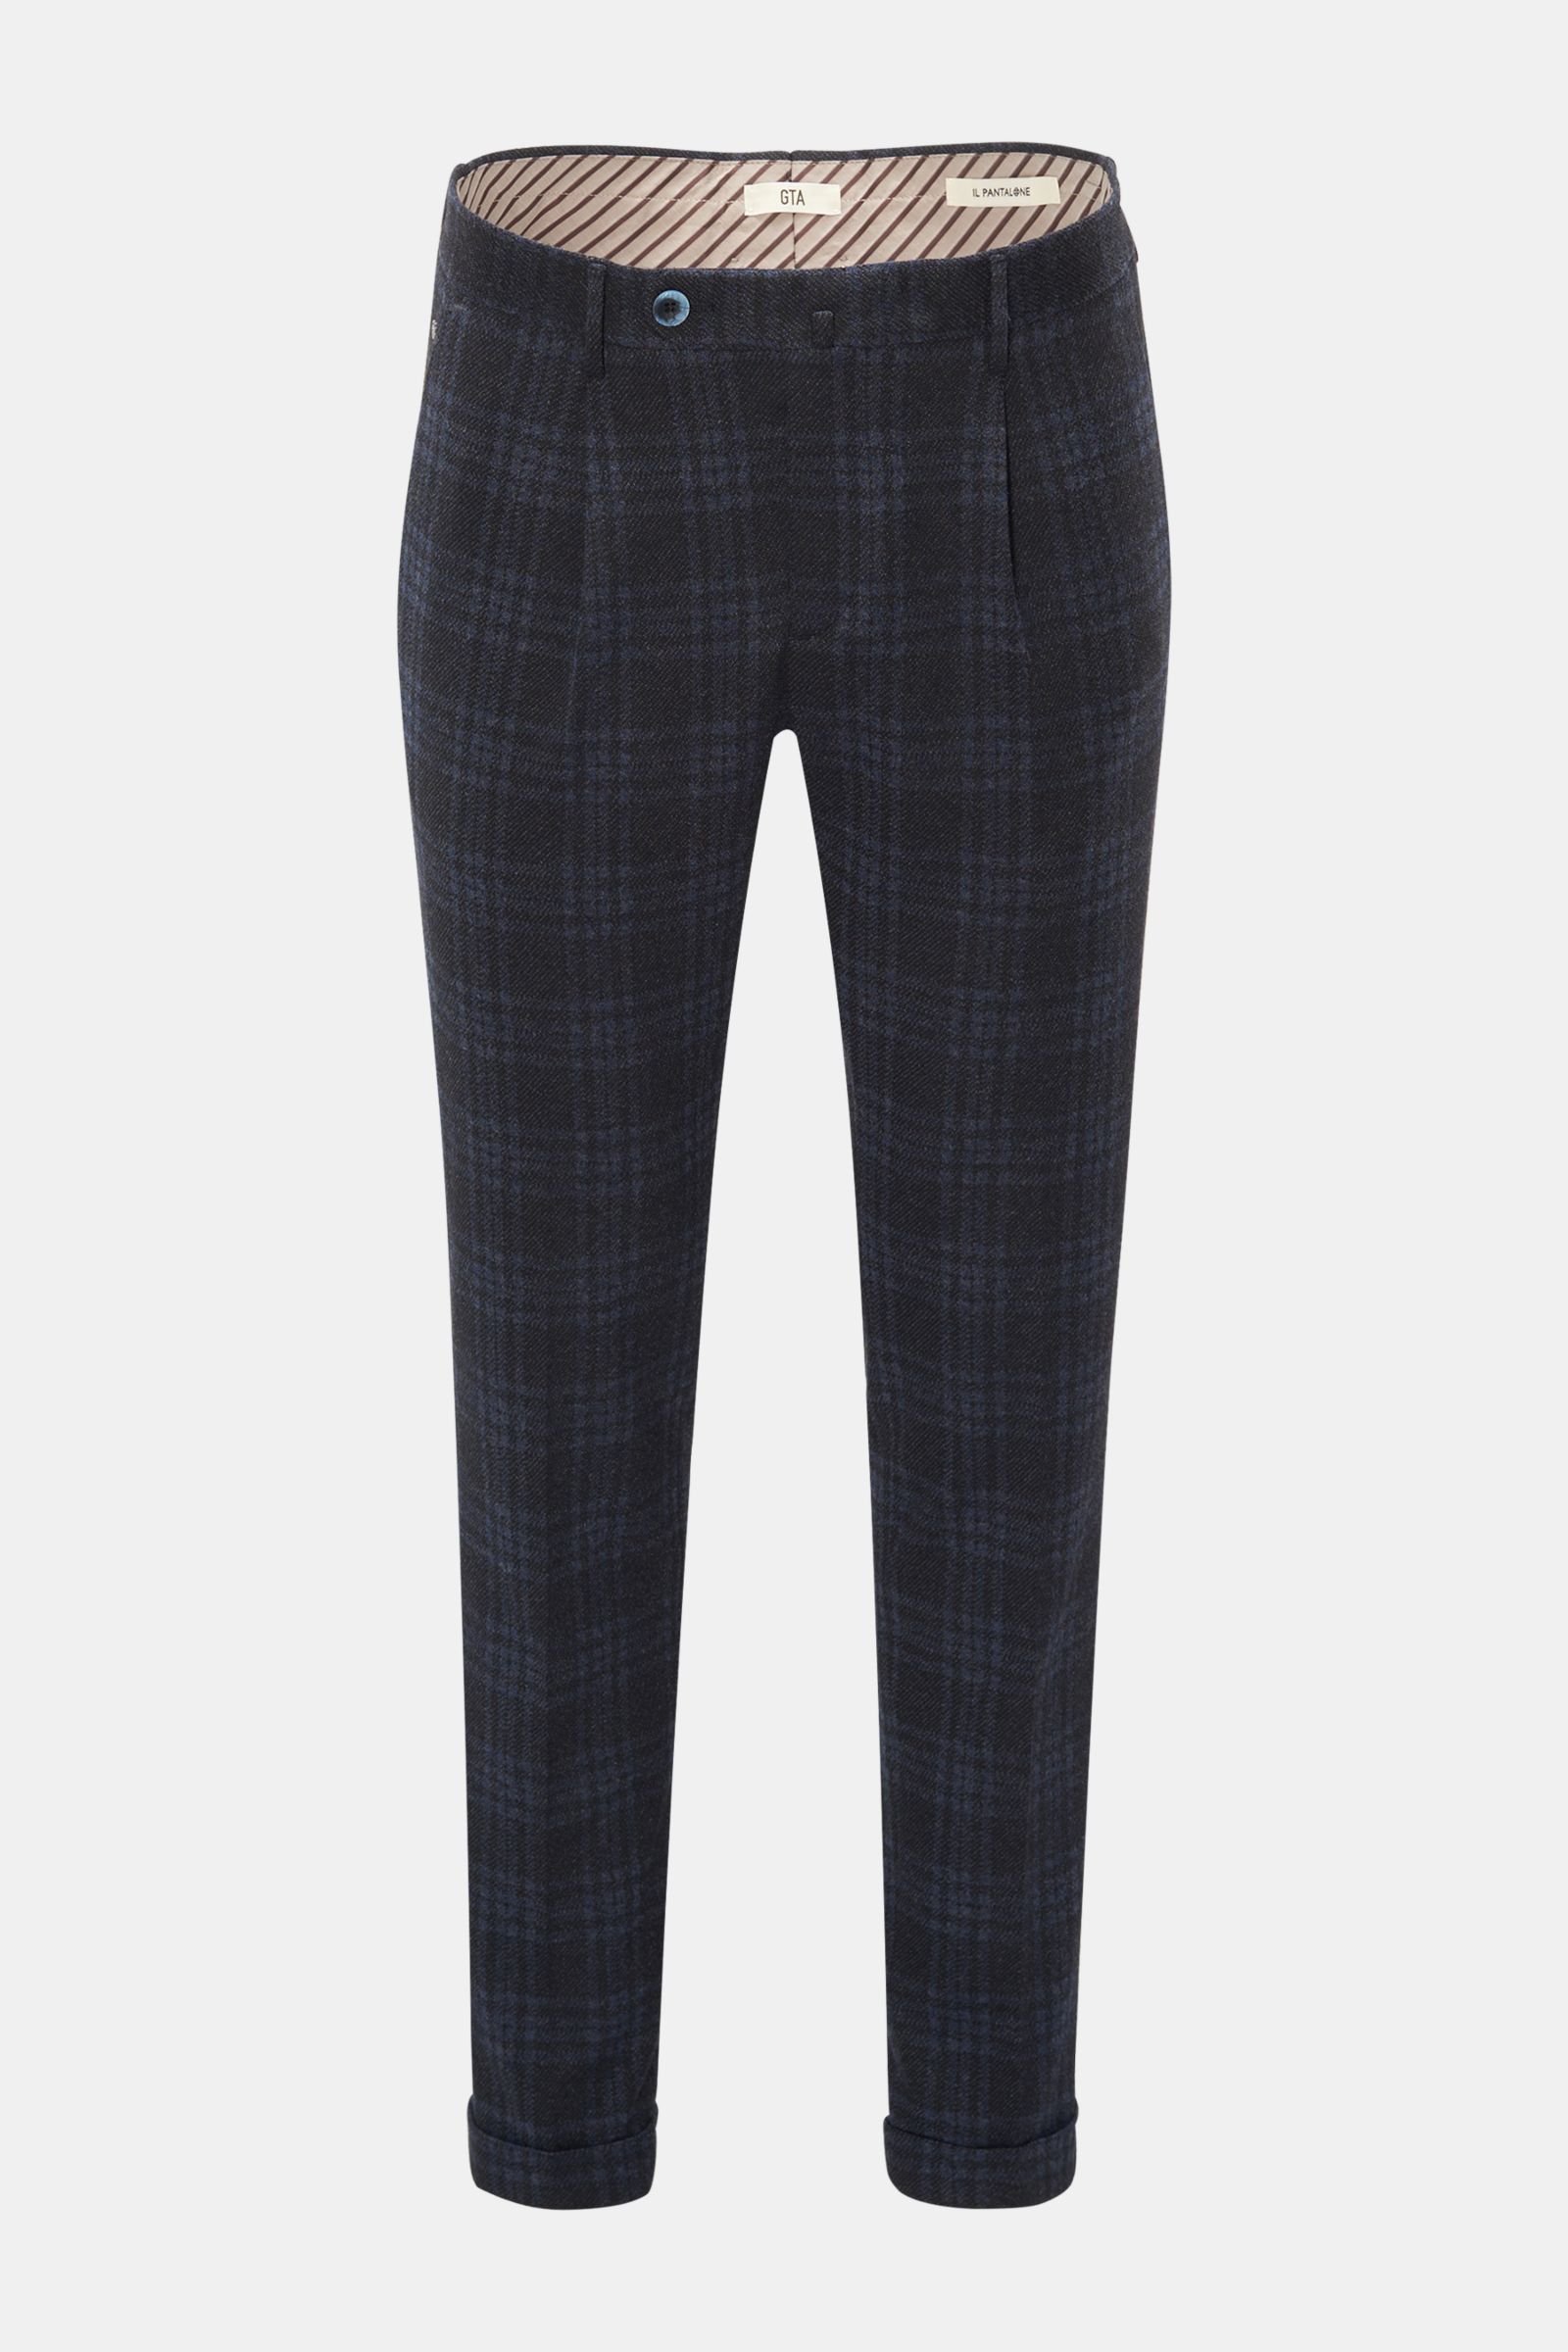 Jersey trousers 'Slim' navy checked